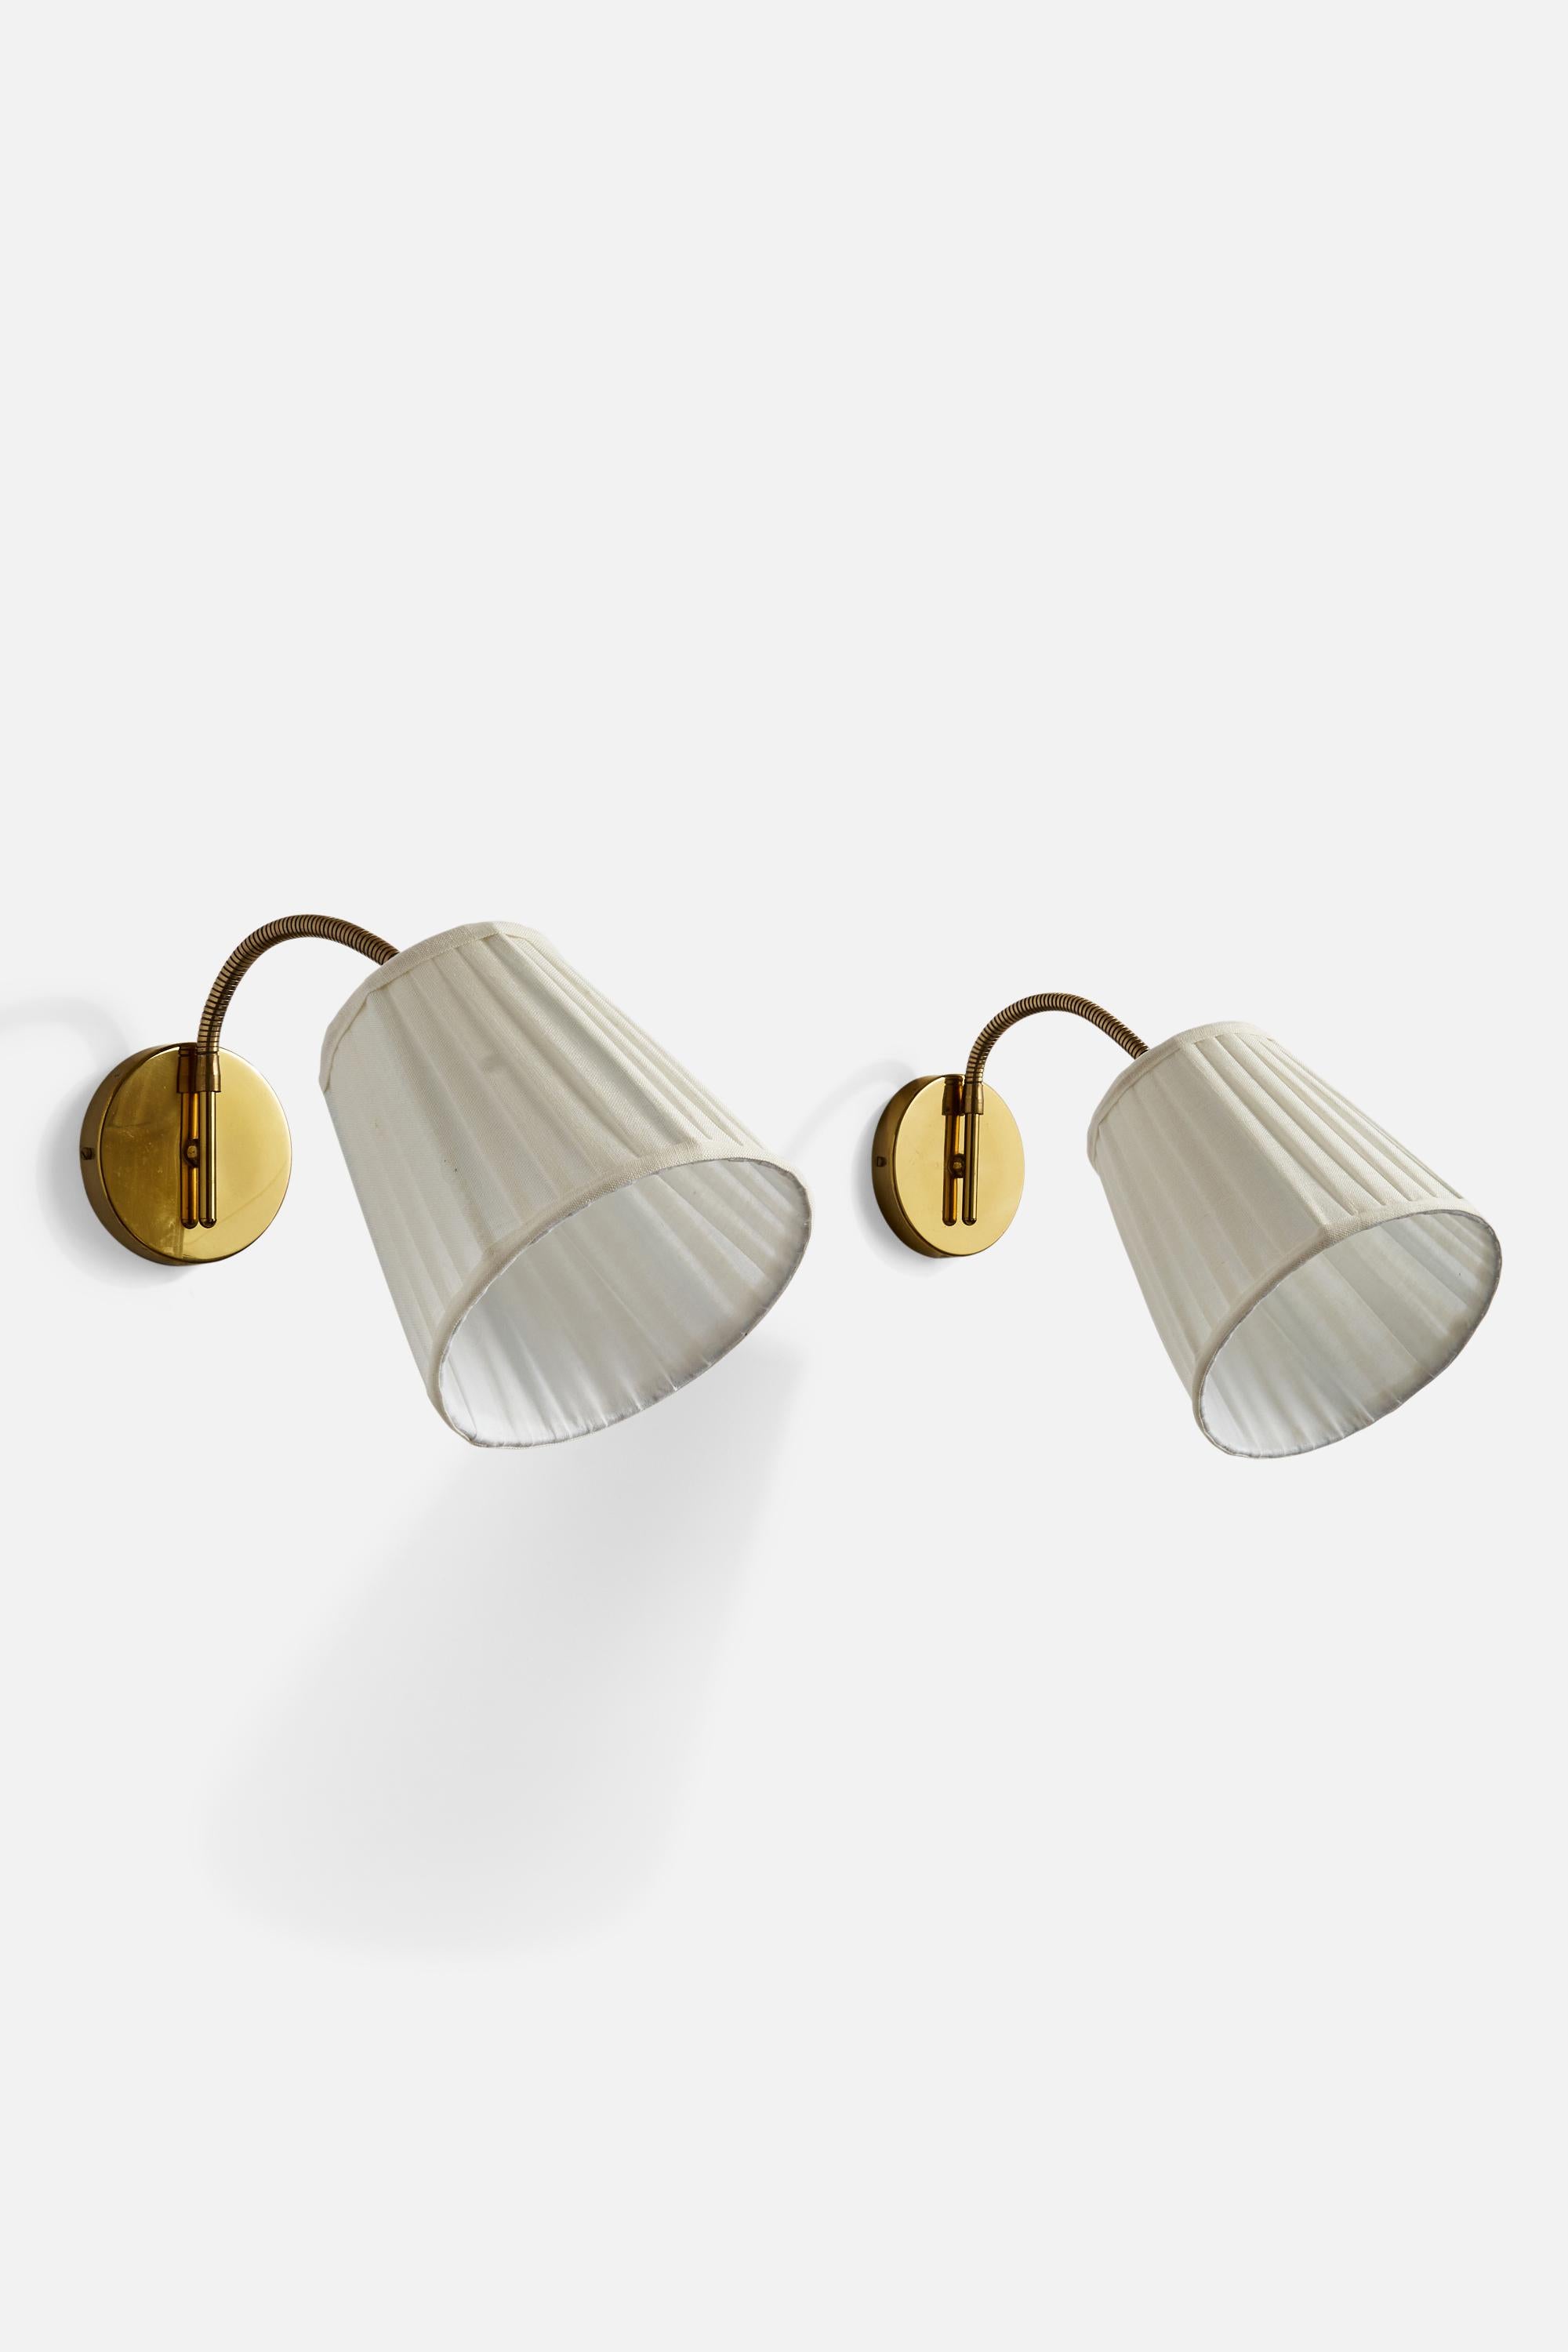 A pair of adjustable brass and white fabric wall lights designed and produced by KEAK Belysning, Sweden, 1970s.

Dimensions variable.
Overall Dimensions (inches): 21.75” H x 8” W x 12” D
Back Plate Dimensions (inches): 4.75”  H x 4.75”  W x .75”